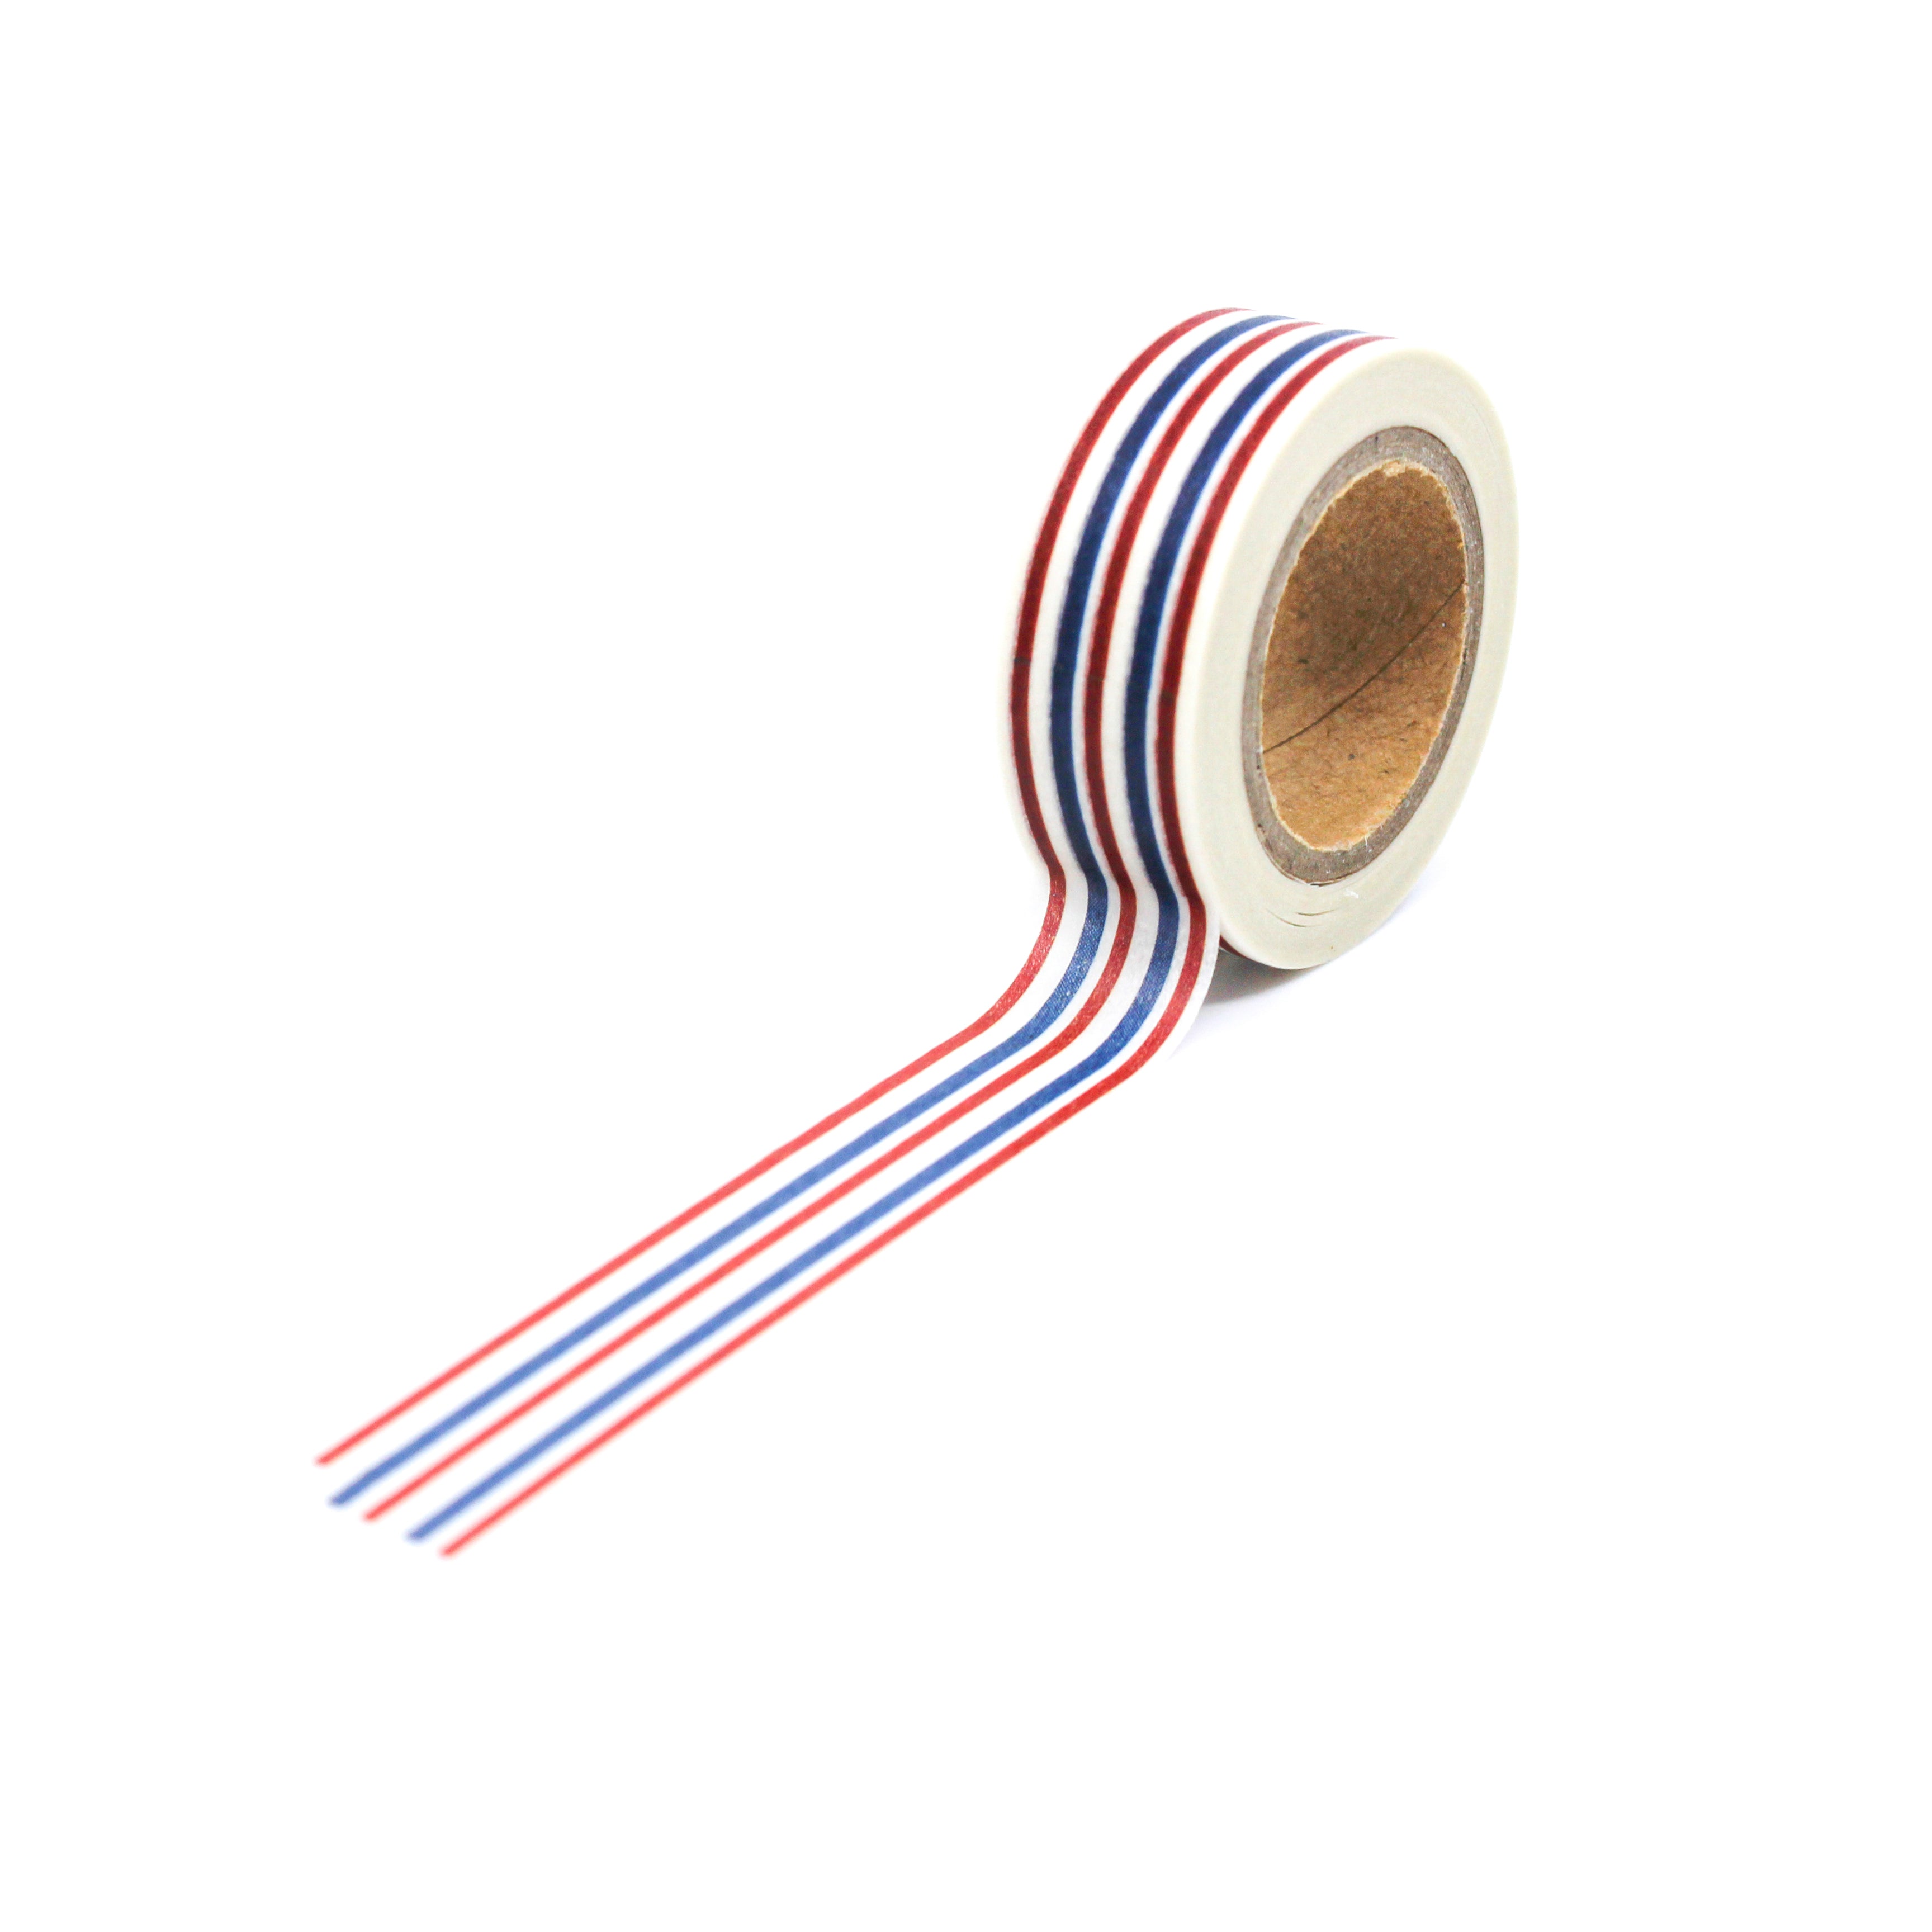 This is a full pattern repeat view of red and blue stripes washi tape from BBB Supplies Craft Shop